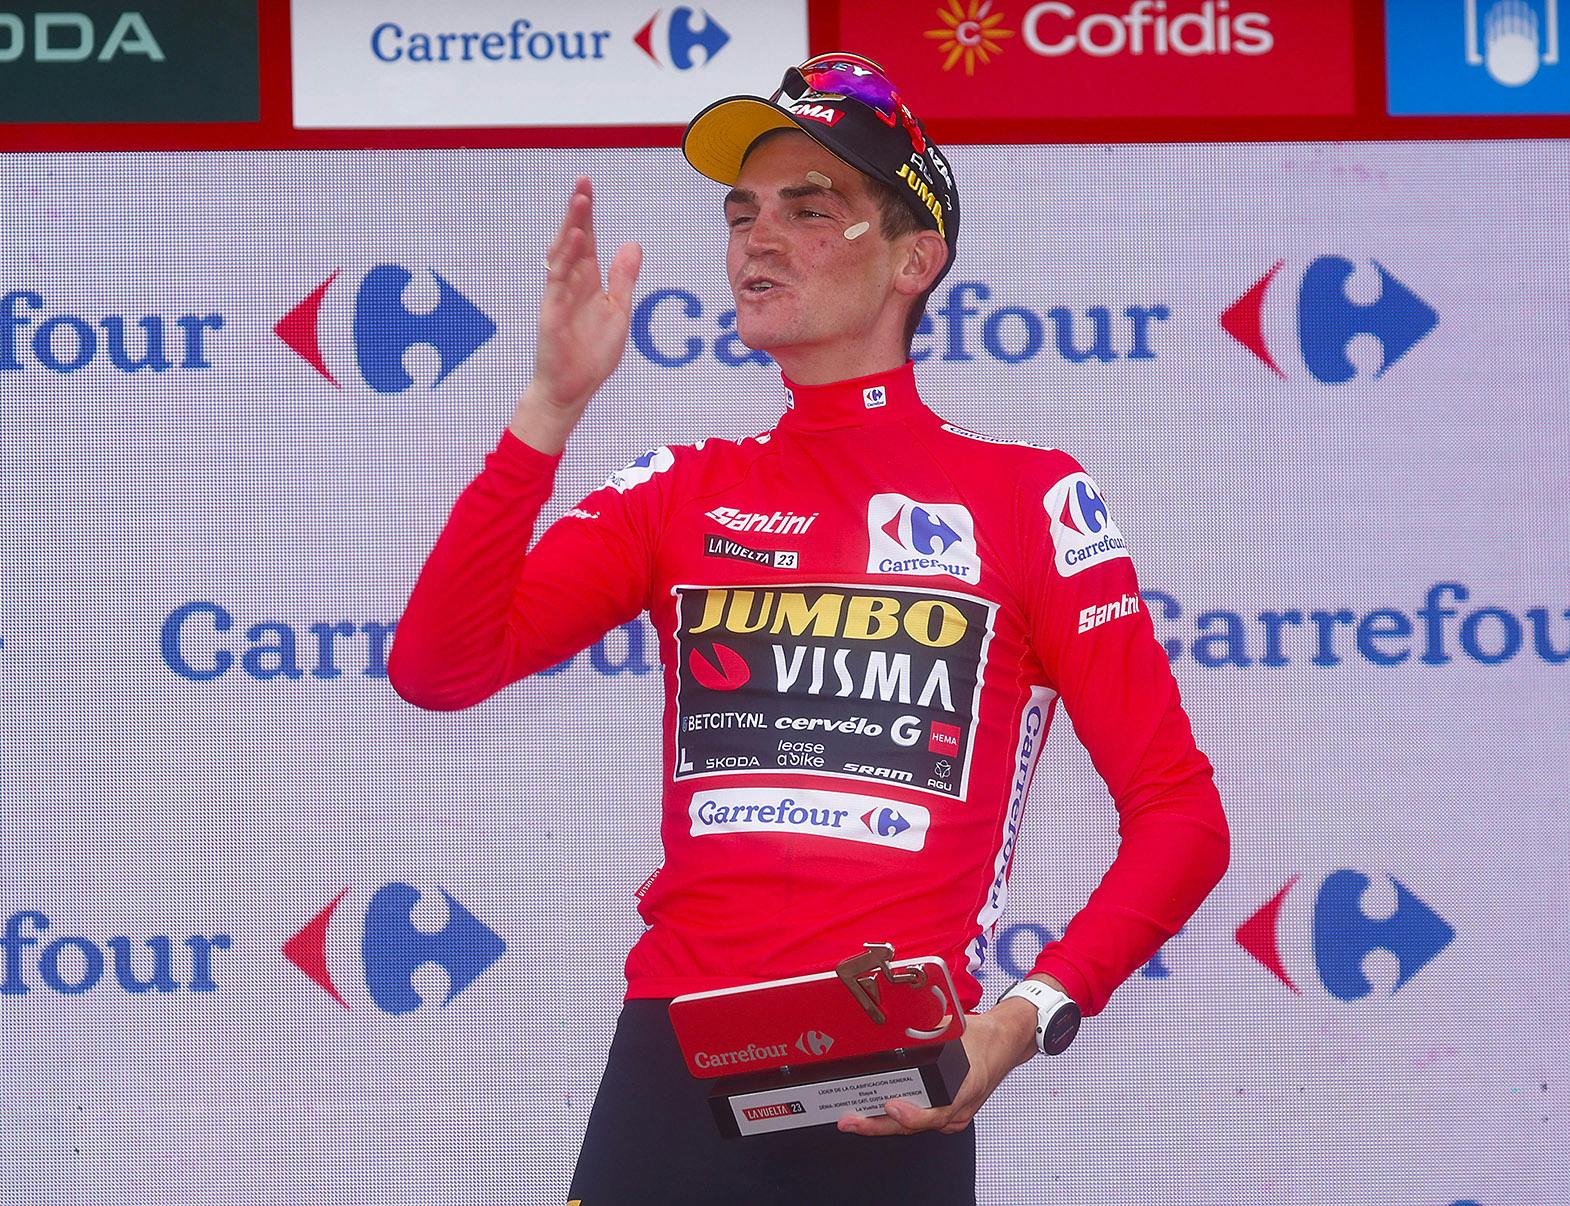 Sepp on the podium wearing the Red Jersey for the first time and blowing a kiss to the crowd.